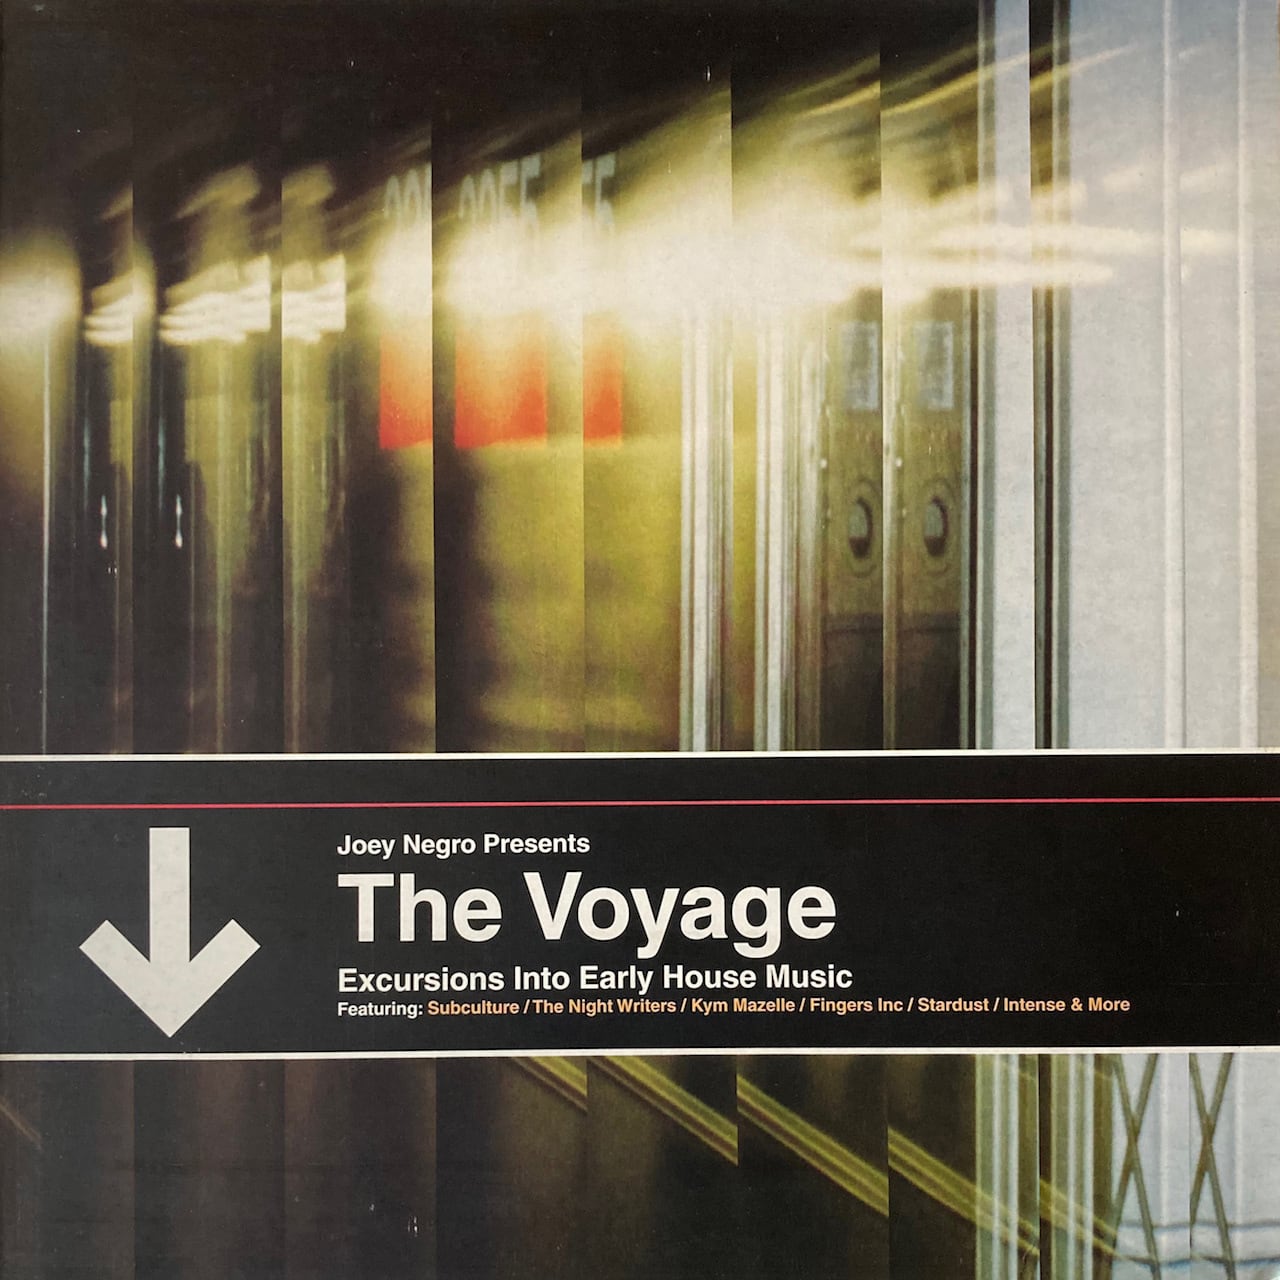 Music)　Store　The　Early　(Joey　AgriTribeMusic　(Excursions　Records　Negro)　House　Voyage　Used　into　NEW　【Used　2LP】